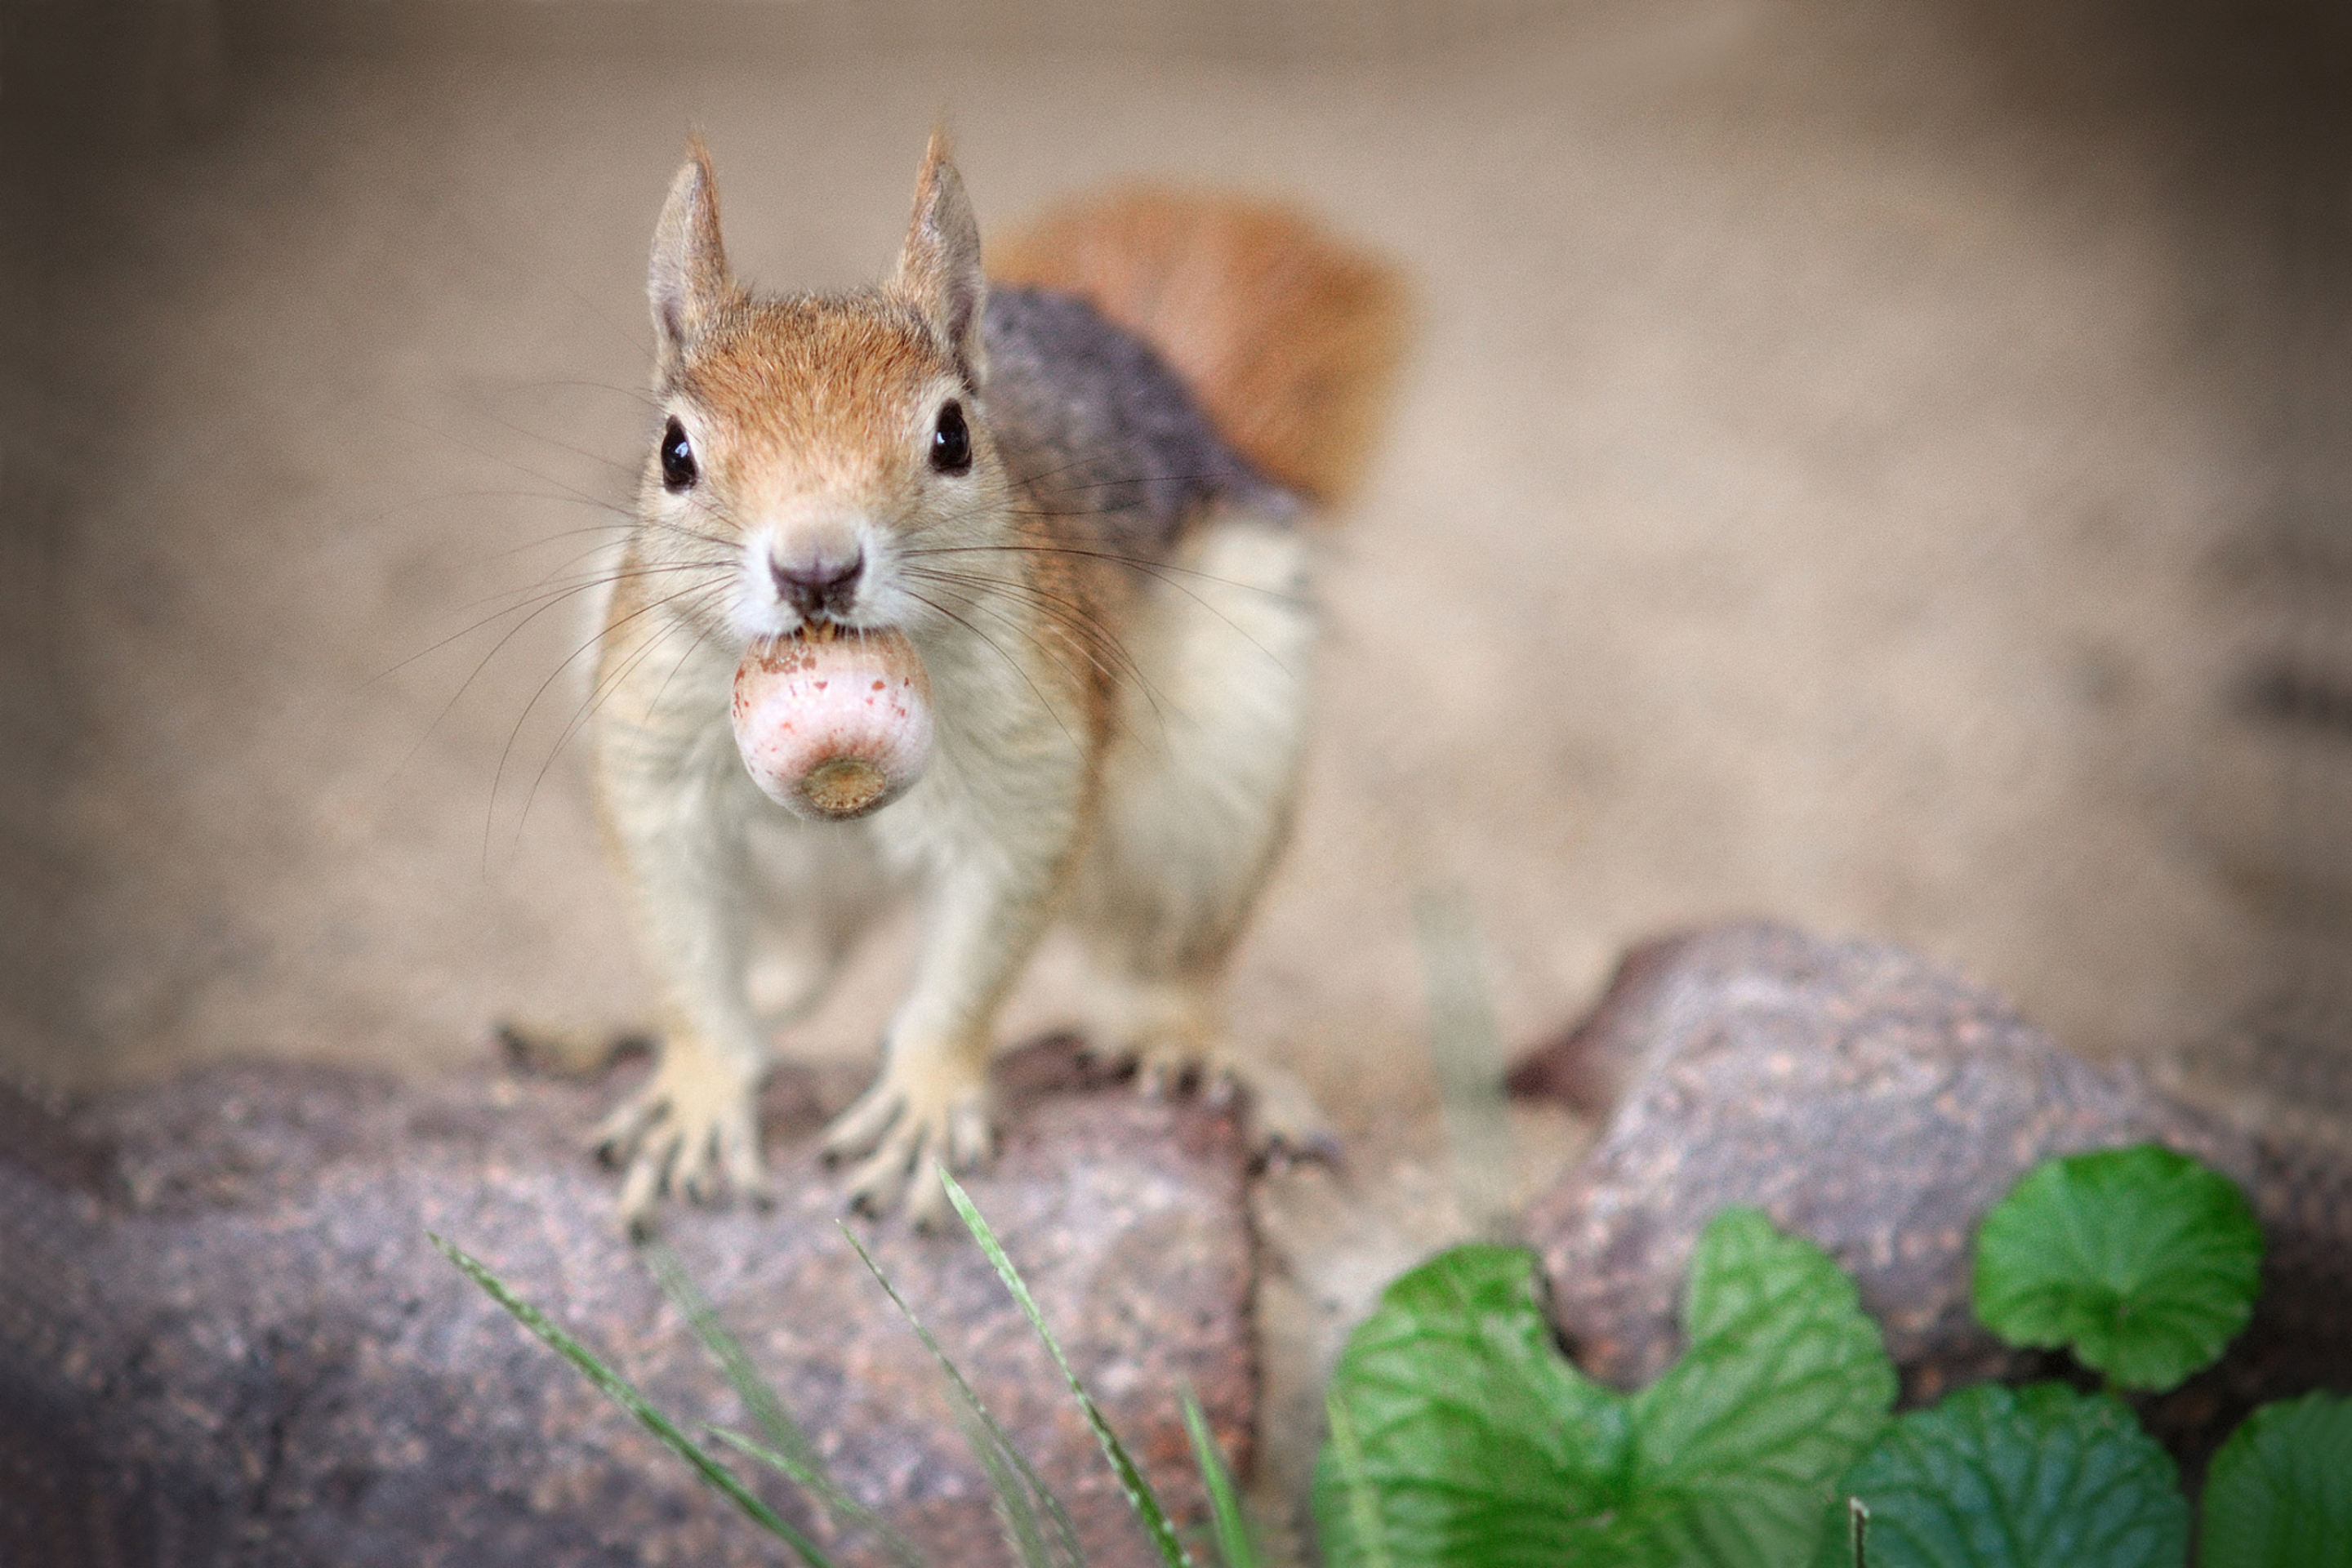 Funny Squirrel With Nut screenshot #1 2880x1920